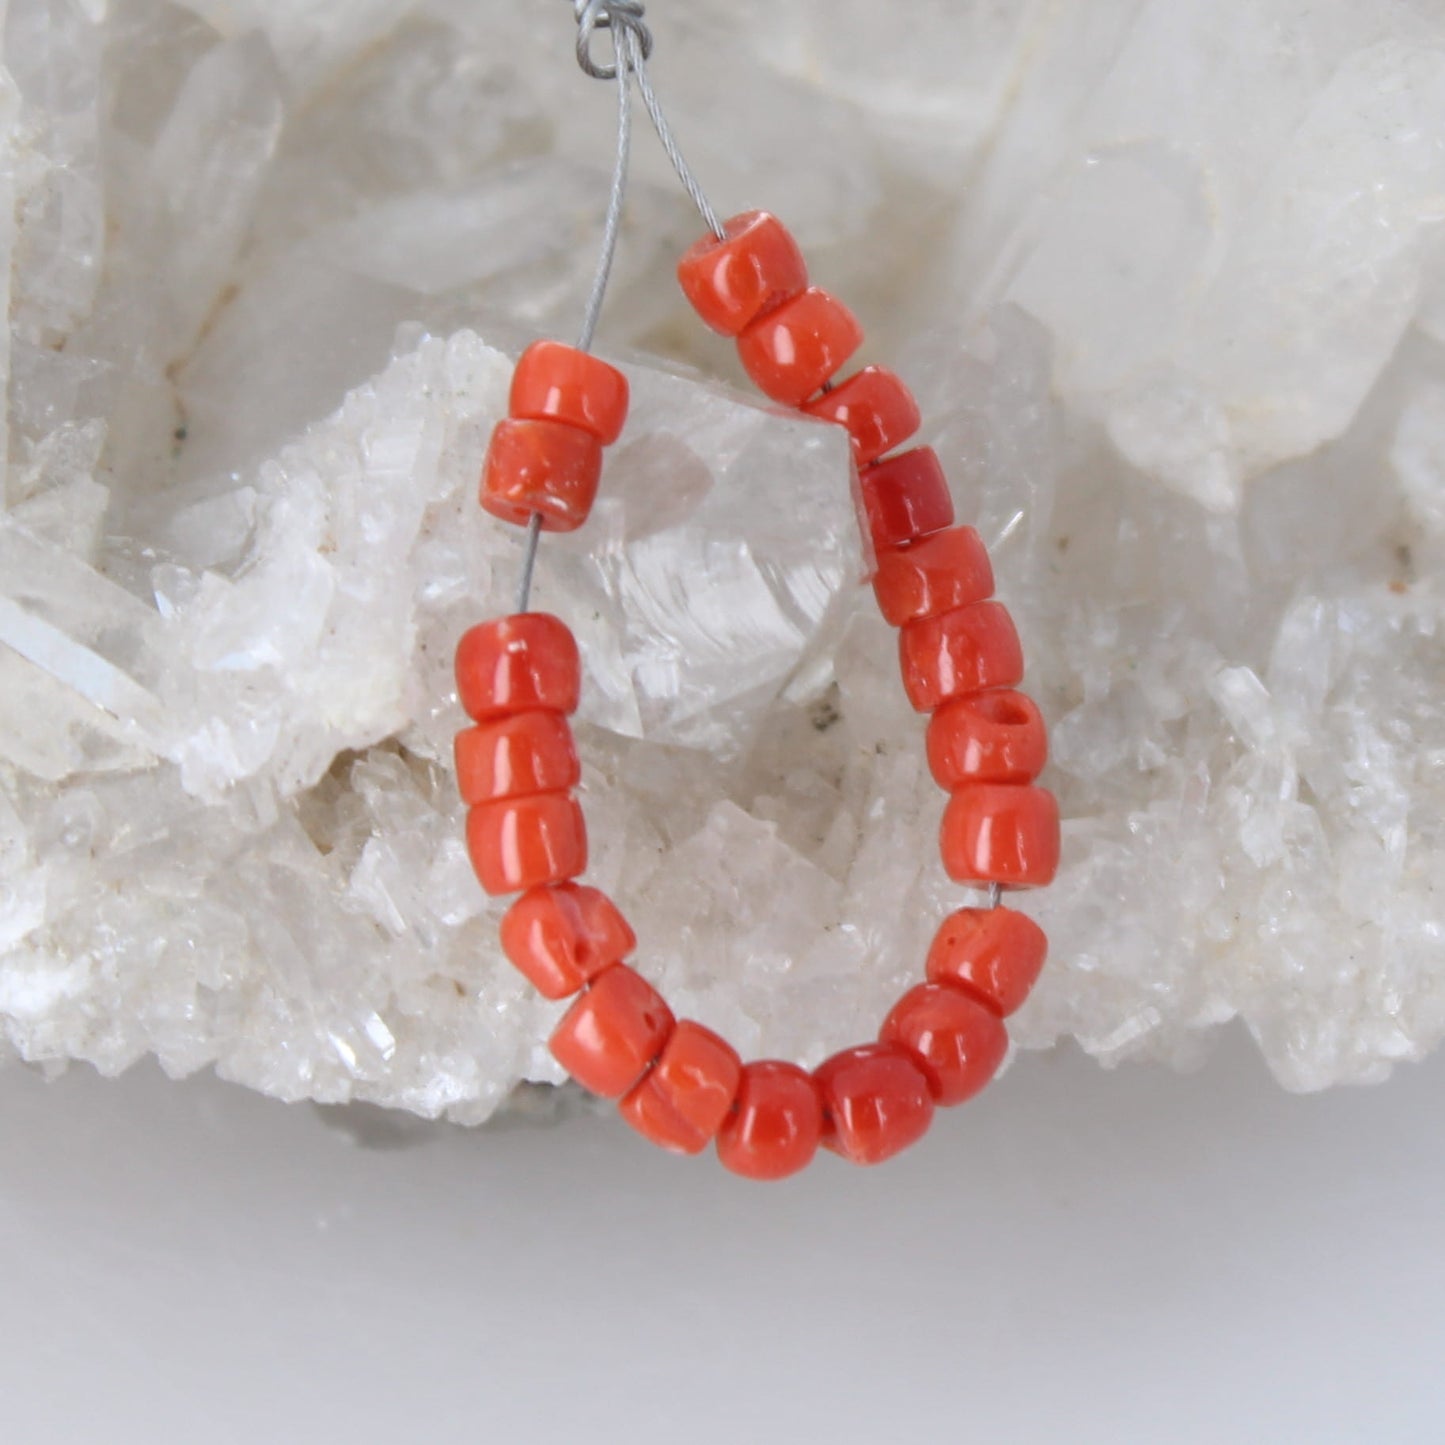 AAA Light Red Italian Coral Beads Pueblo Shaped 5mm 20 Beads